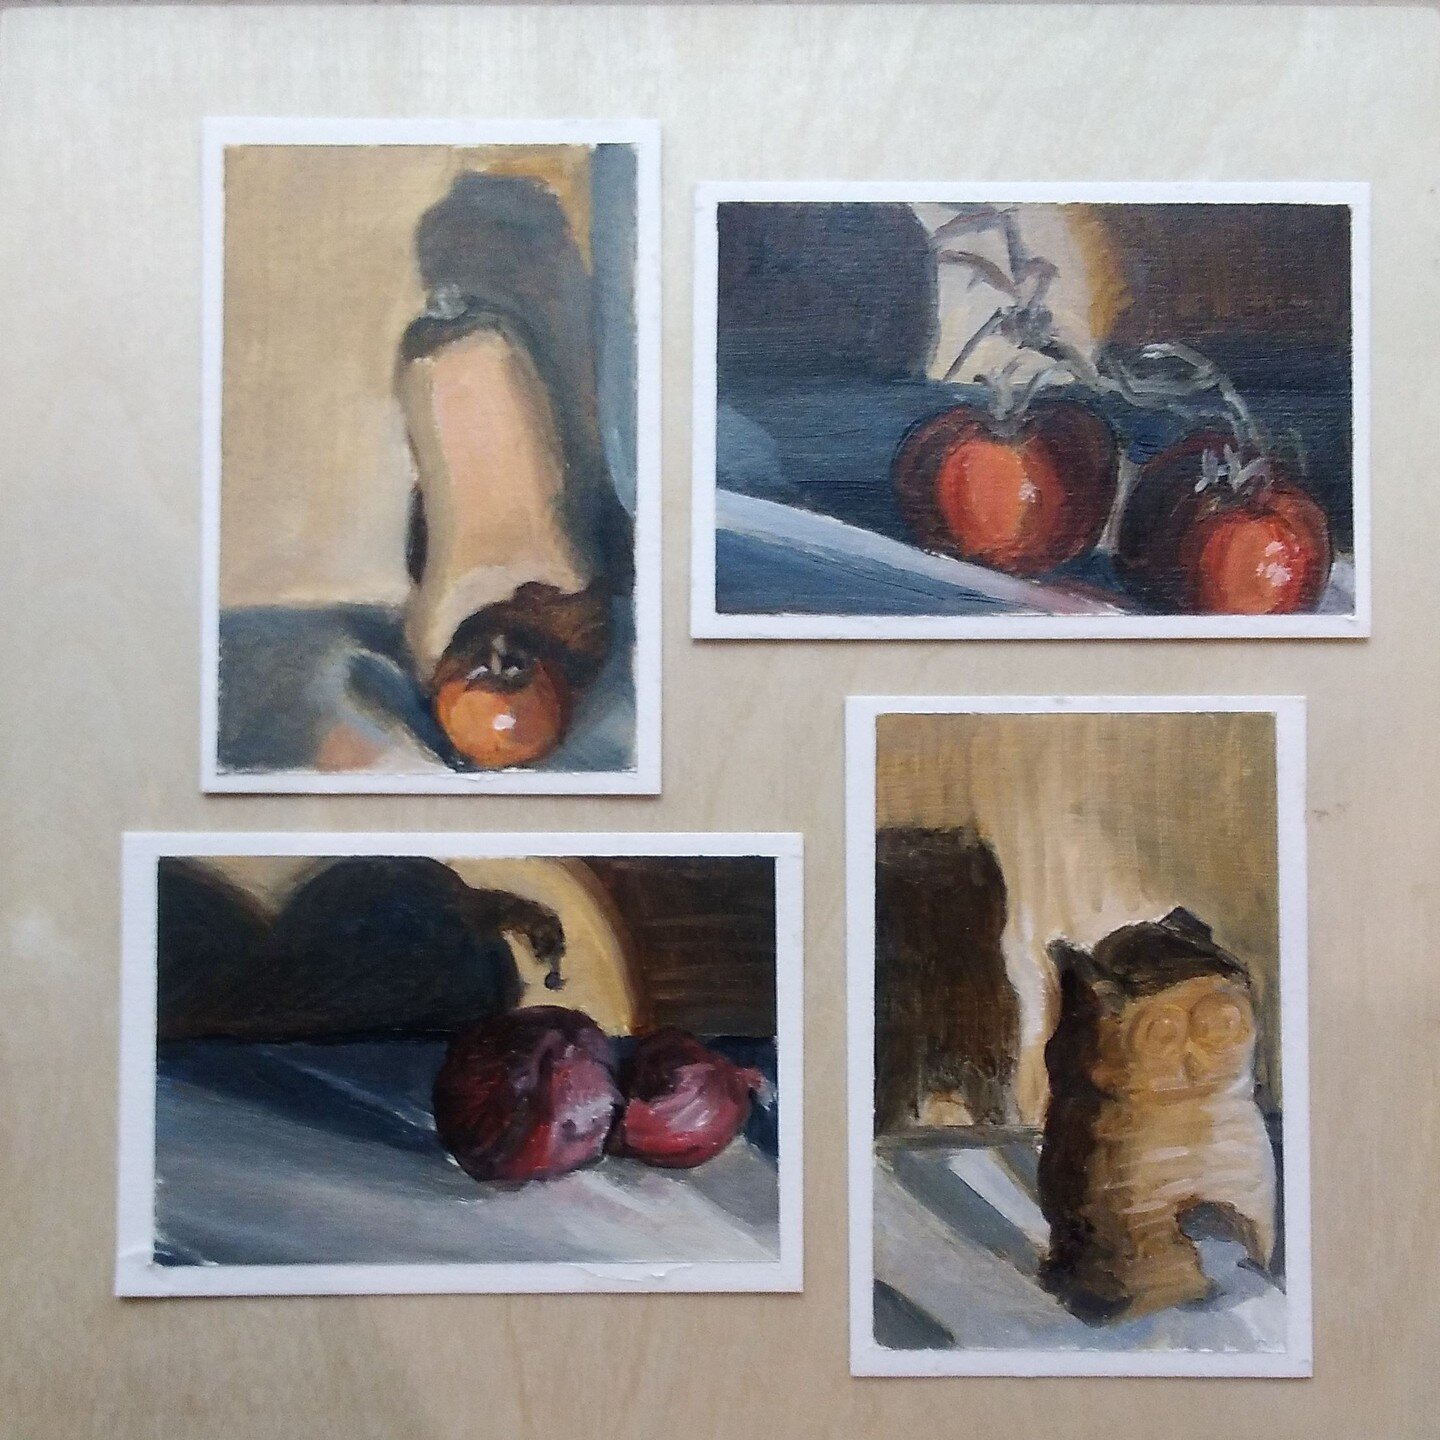 Practicing direct painting (ala prima) by making tiny still-life paintings from life.